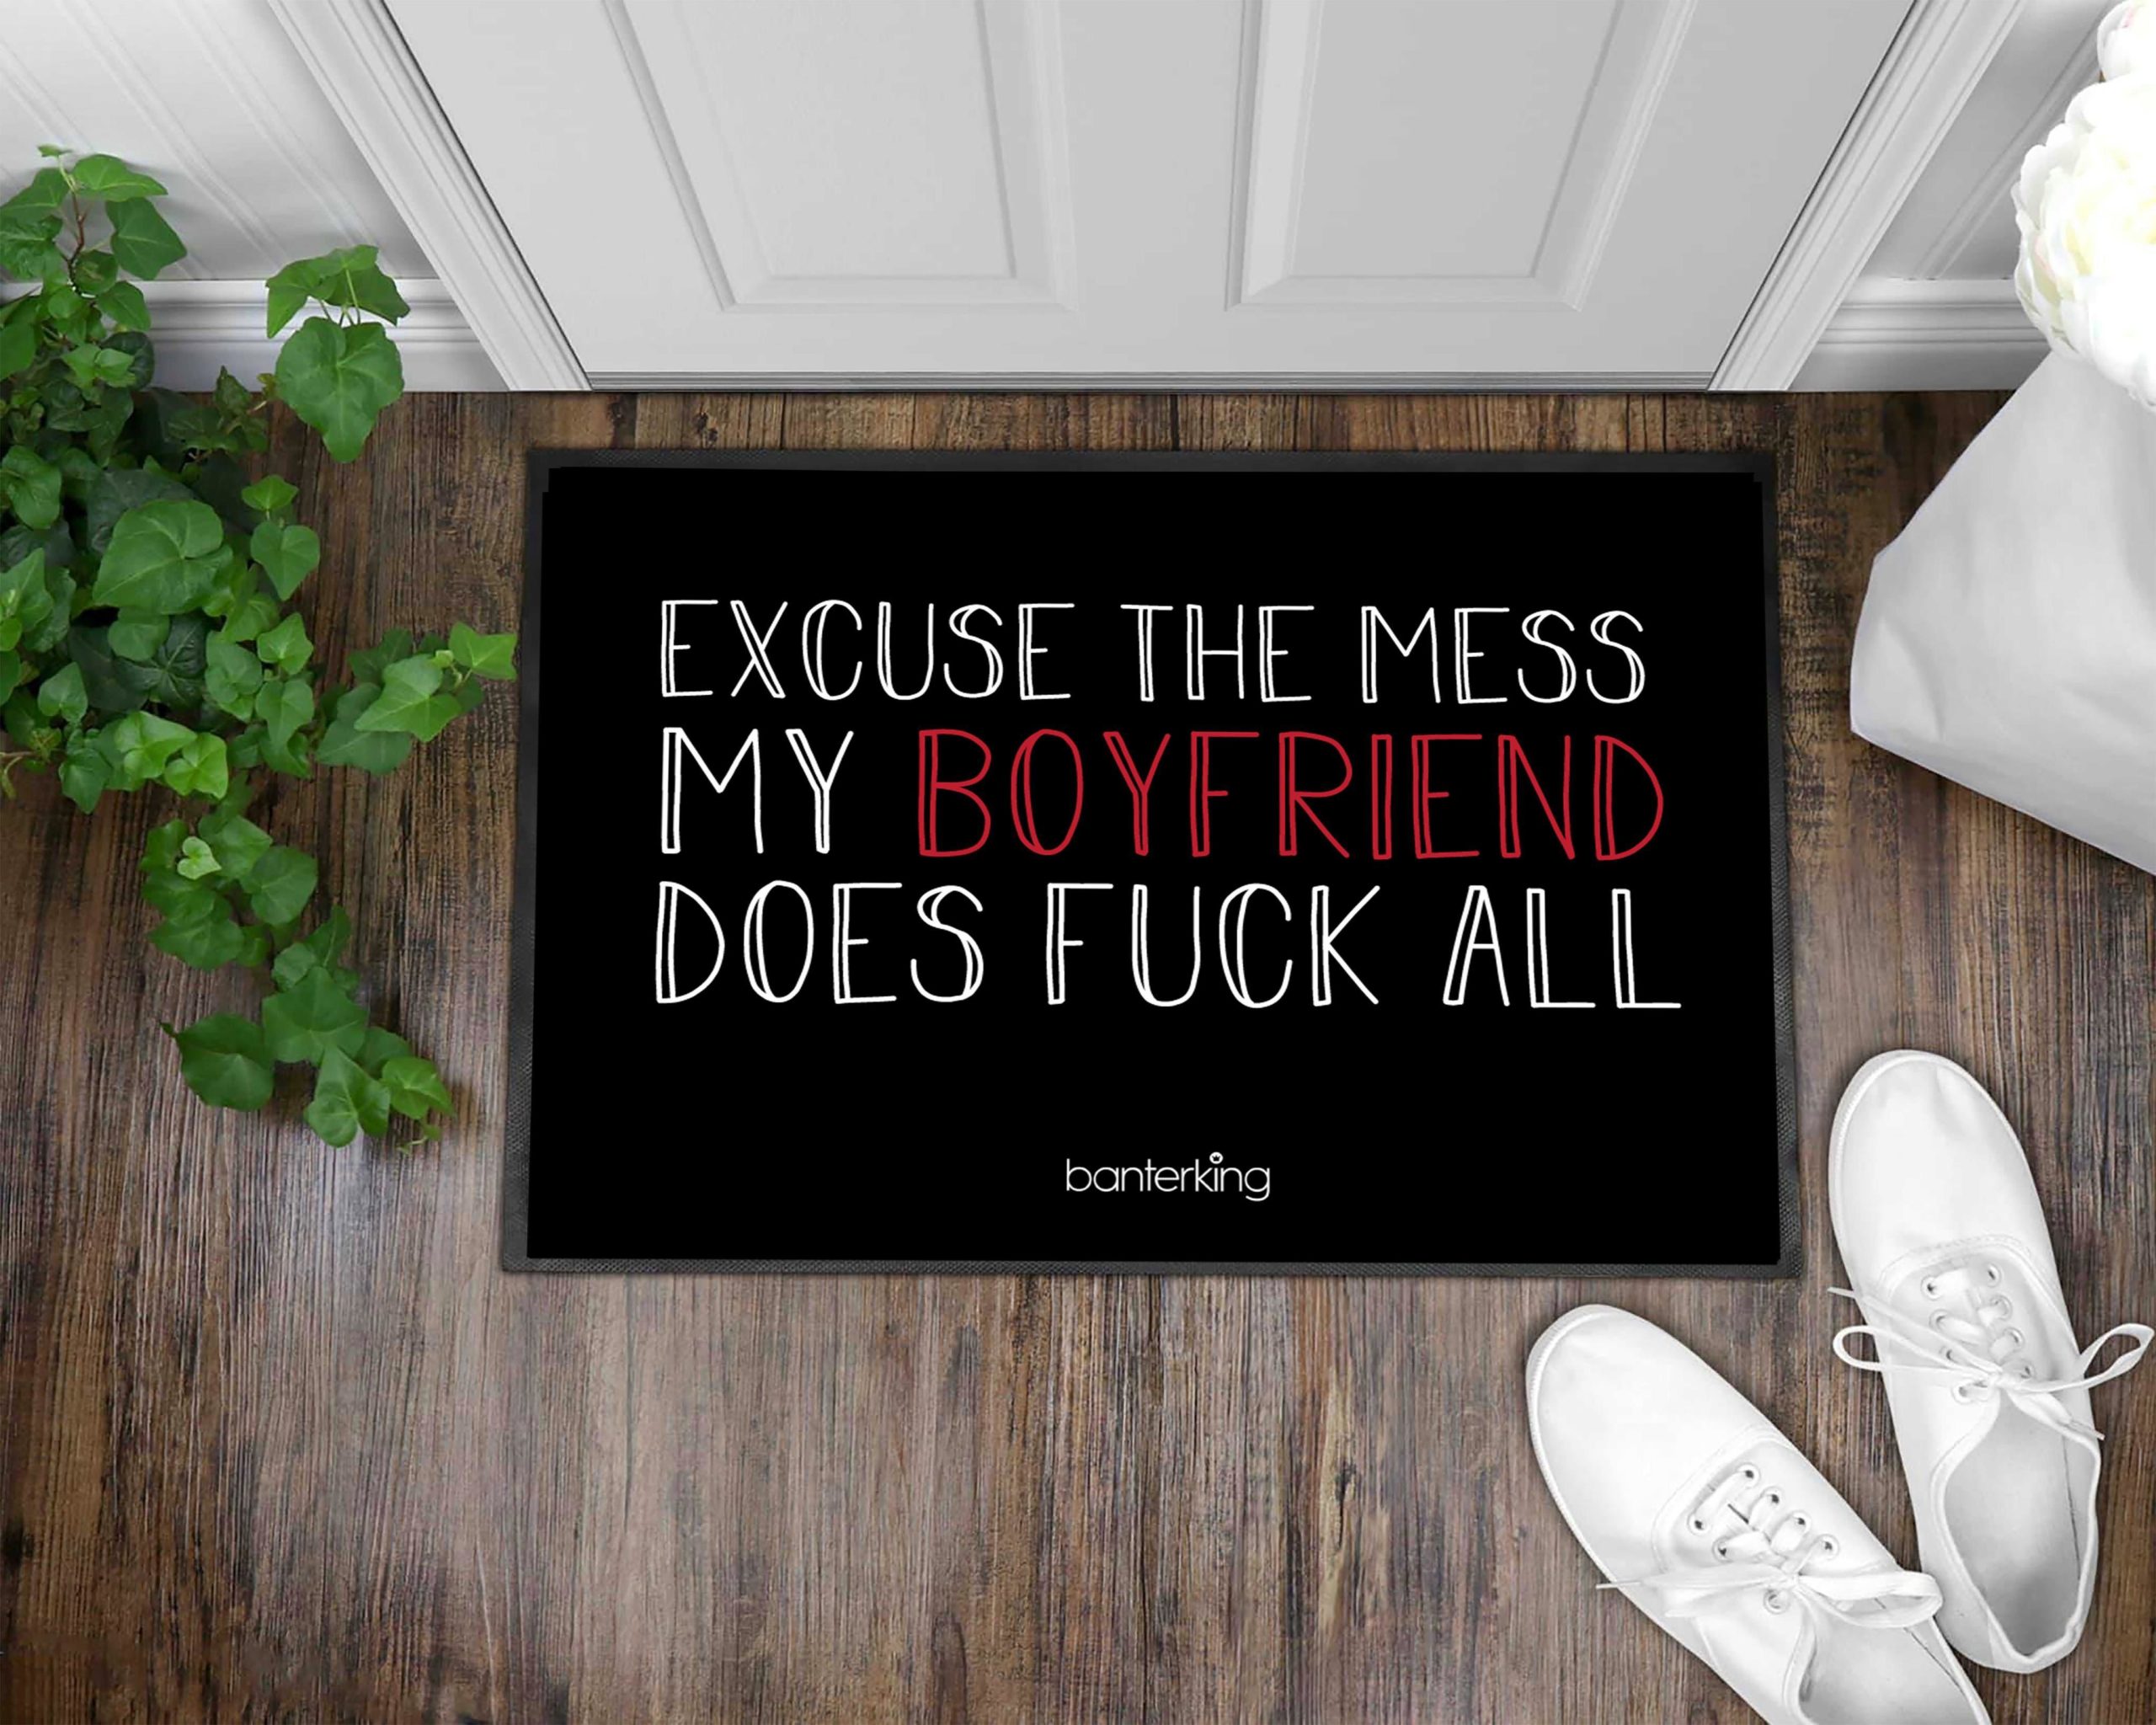 Excuse the mess my boyfriend does fuck all doormat - maria